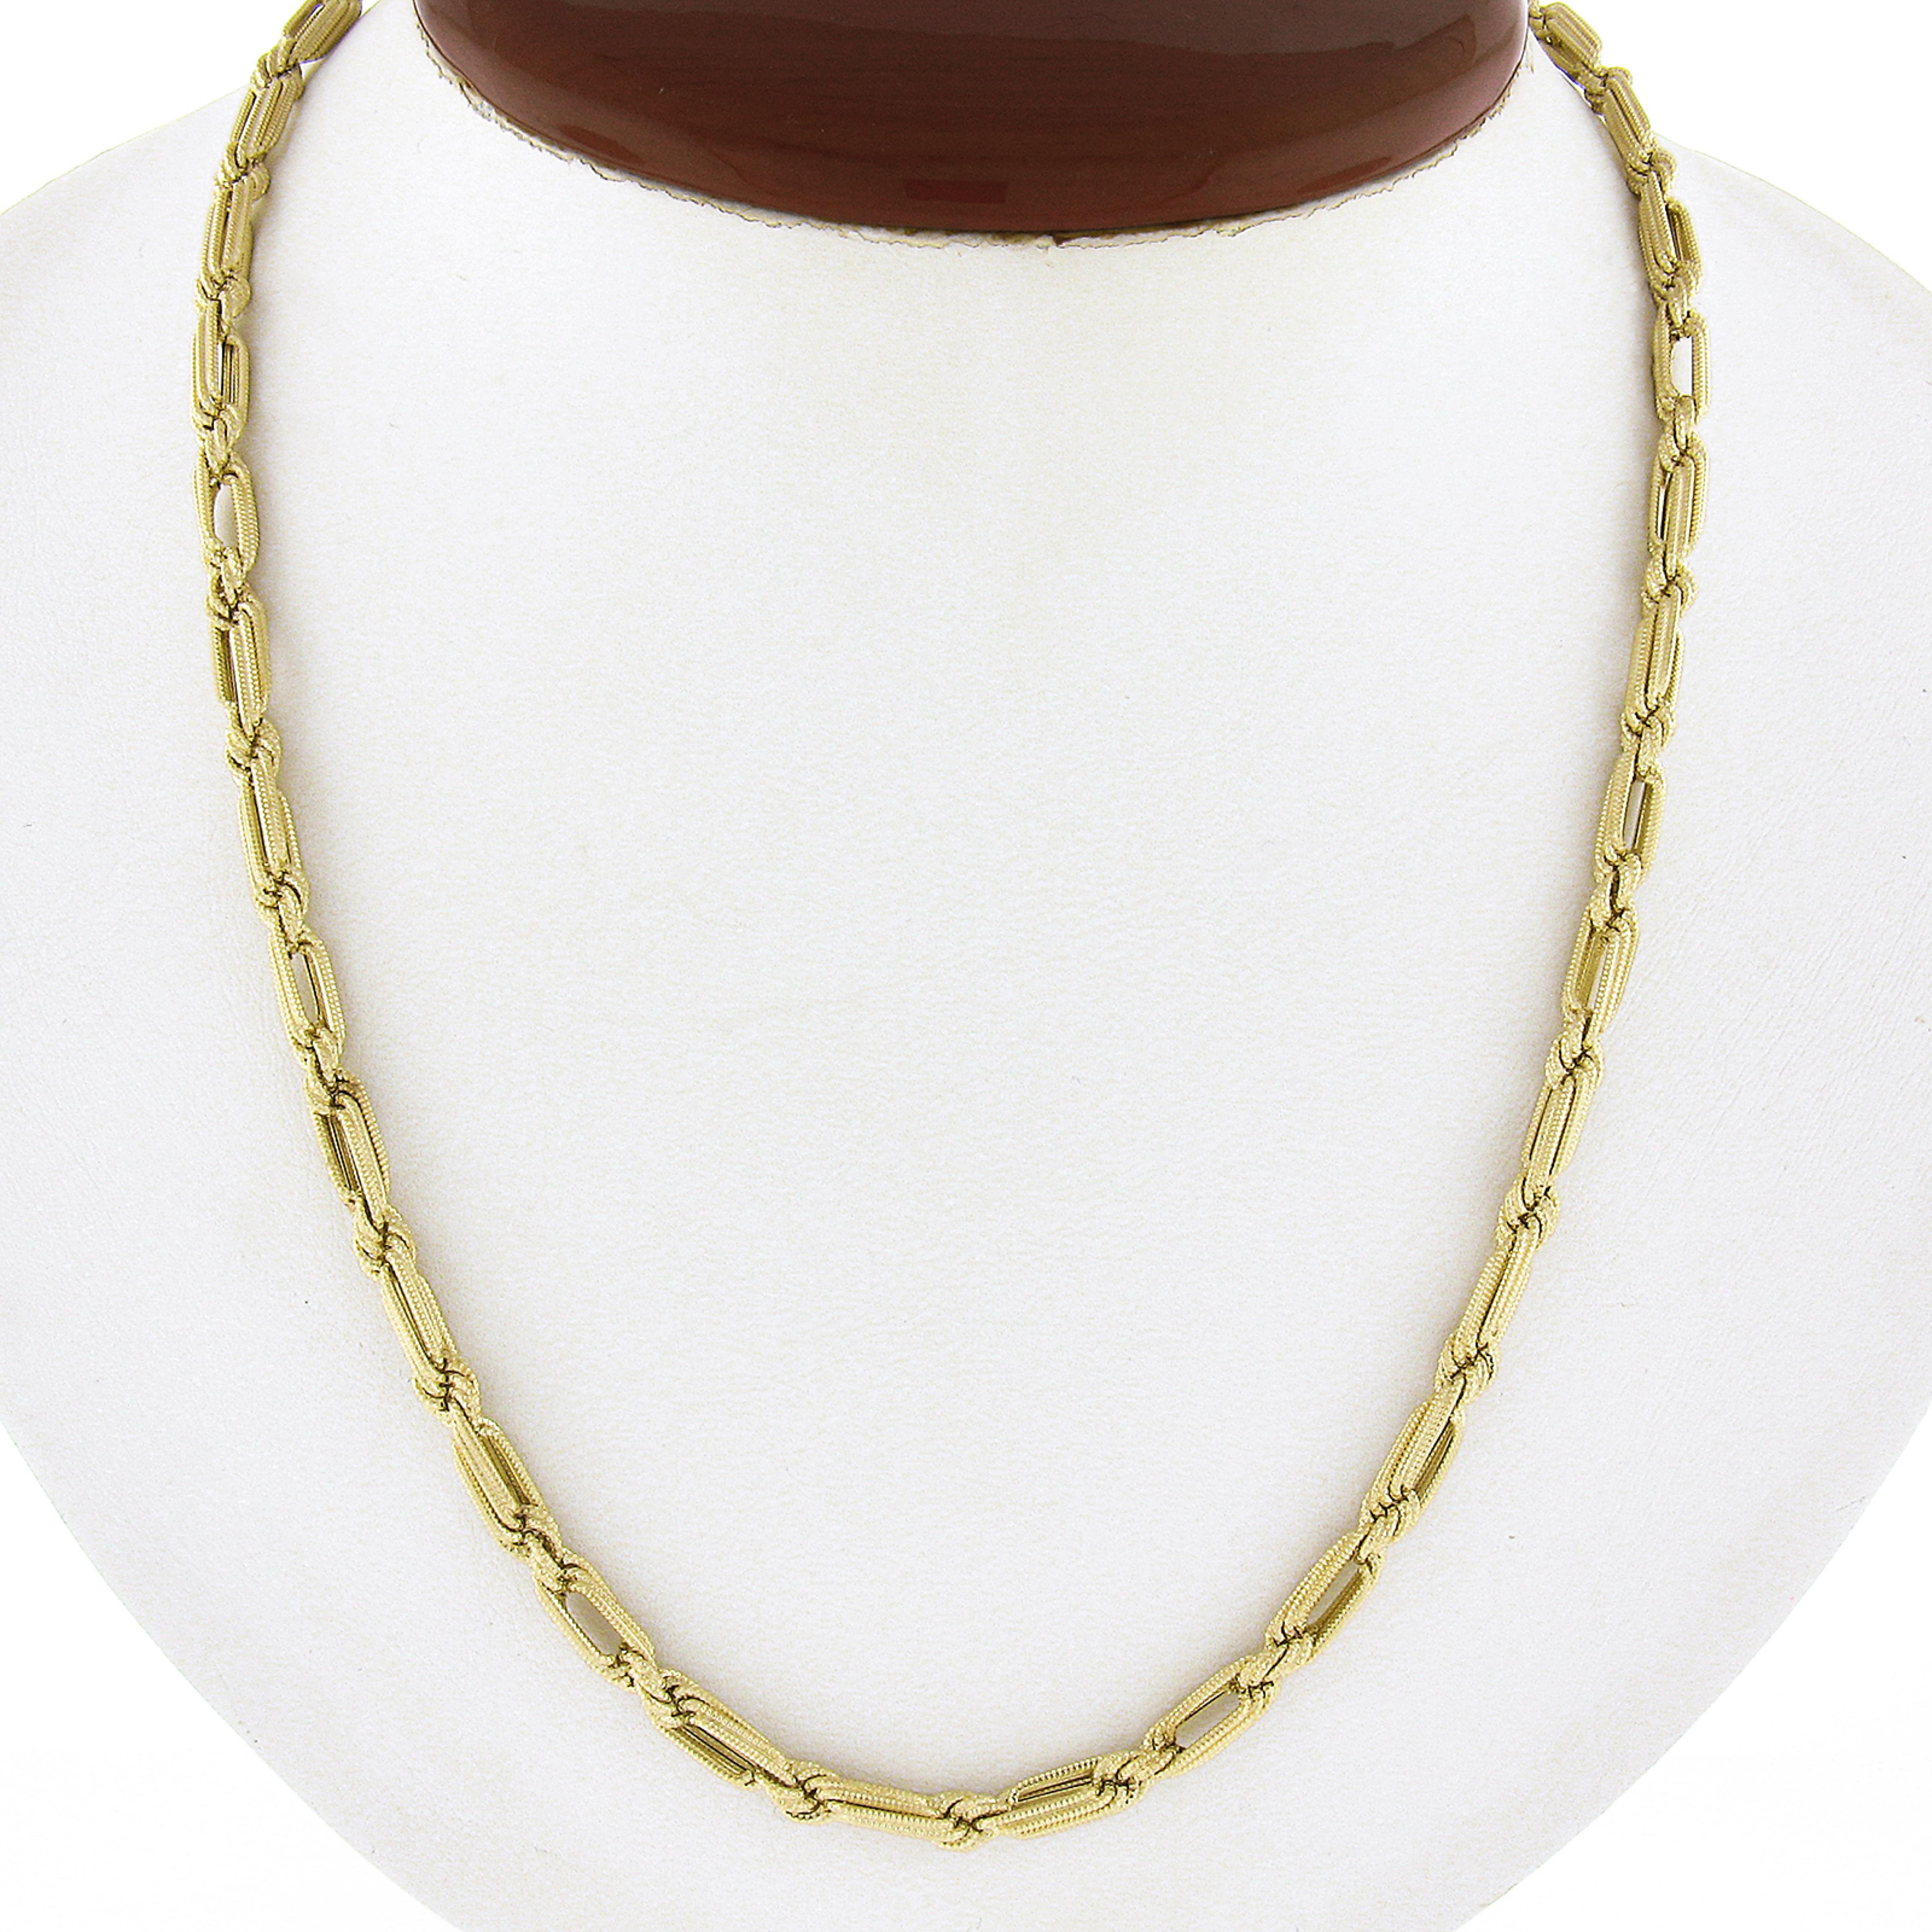 This gorgeous perfect made chain necklace is crafted in solid 14k yellow gold and features rope style links. Each link is constructed from 4 separate textured wires which gives this necklace its unique and outstanding look. This chain measures 18